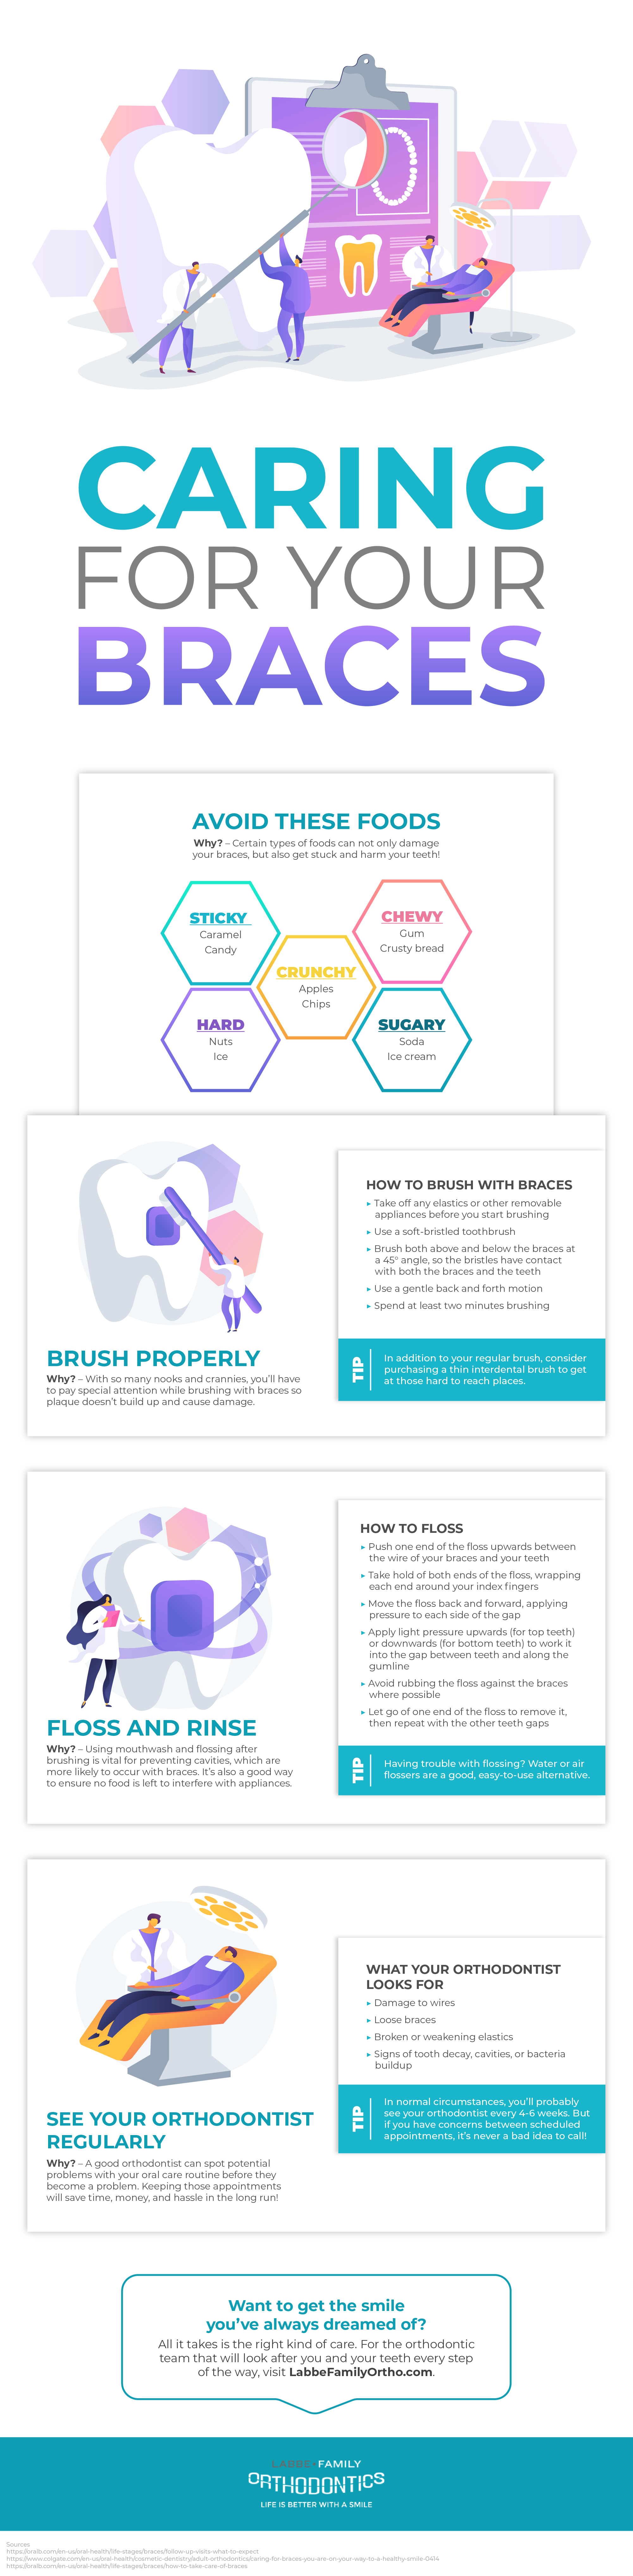 Caring for Your Braces Infographic